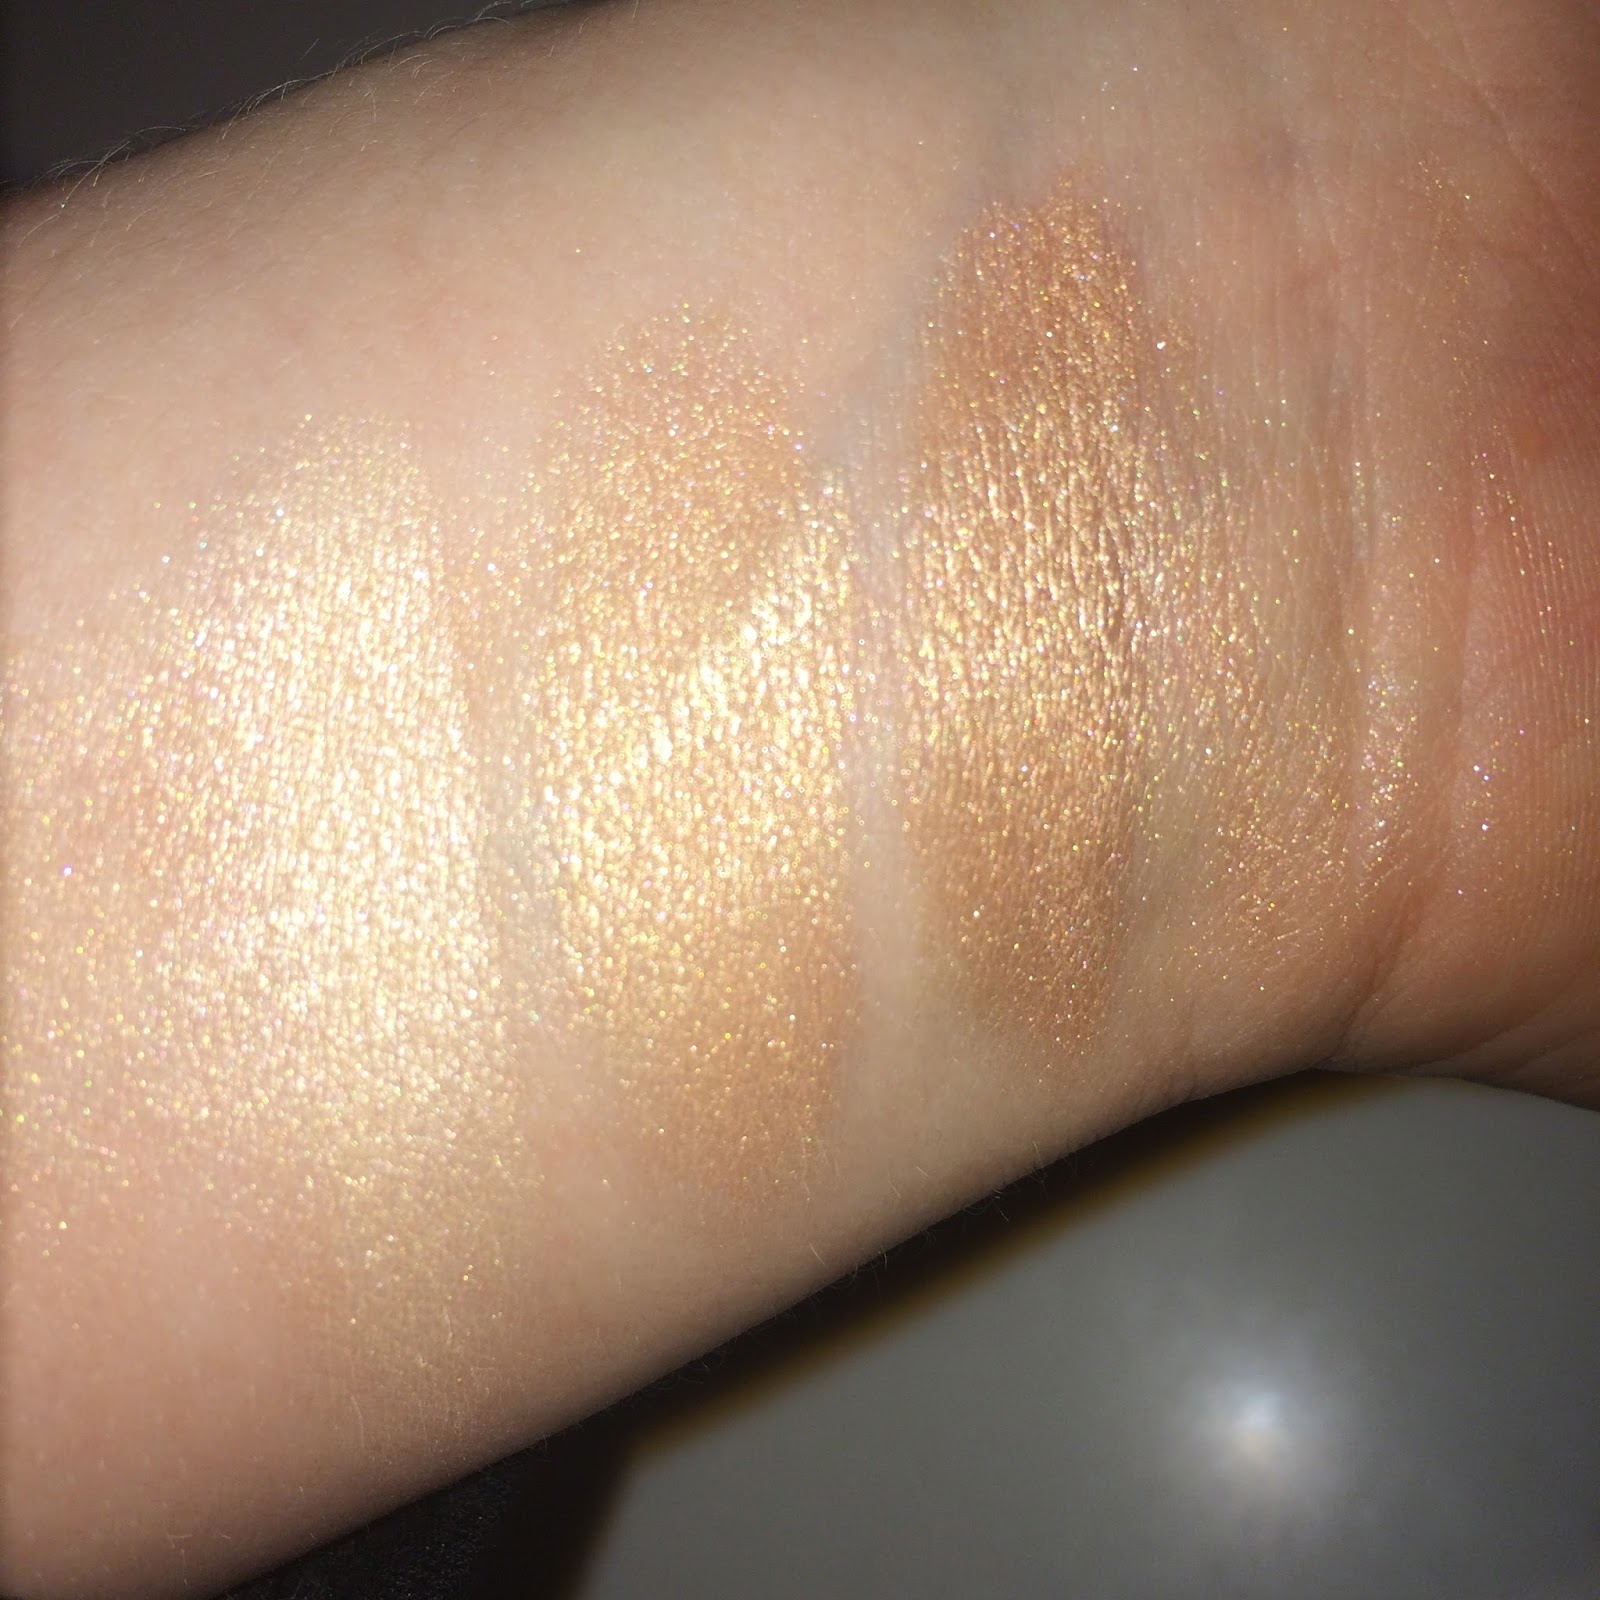 Classy Champagne Pop Review & Swatches Compared to Becca and Opal